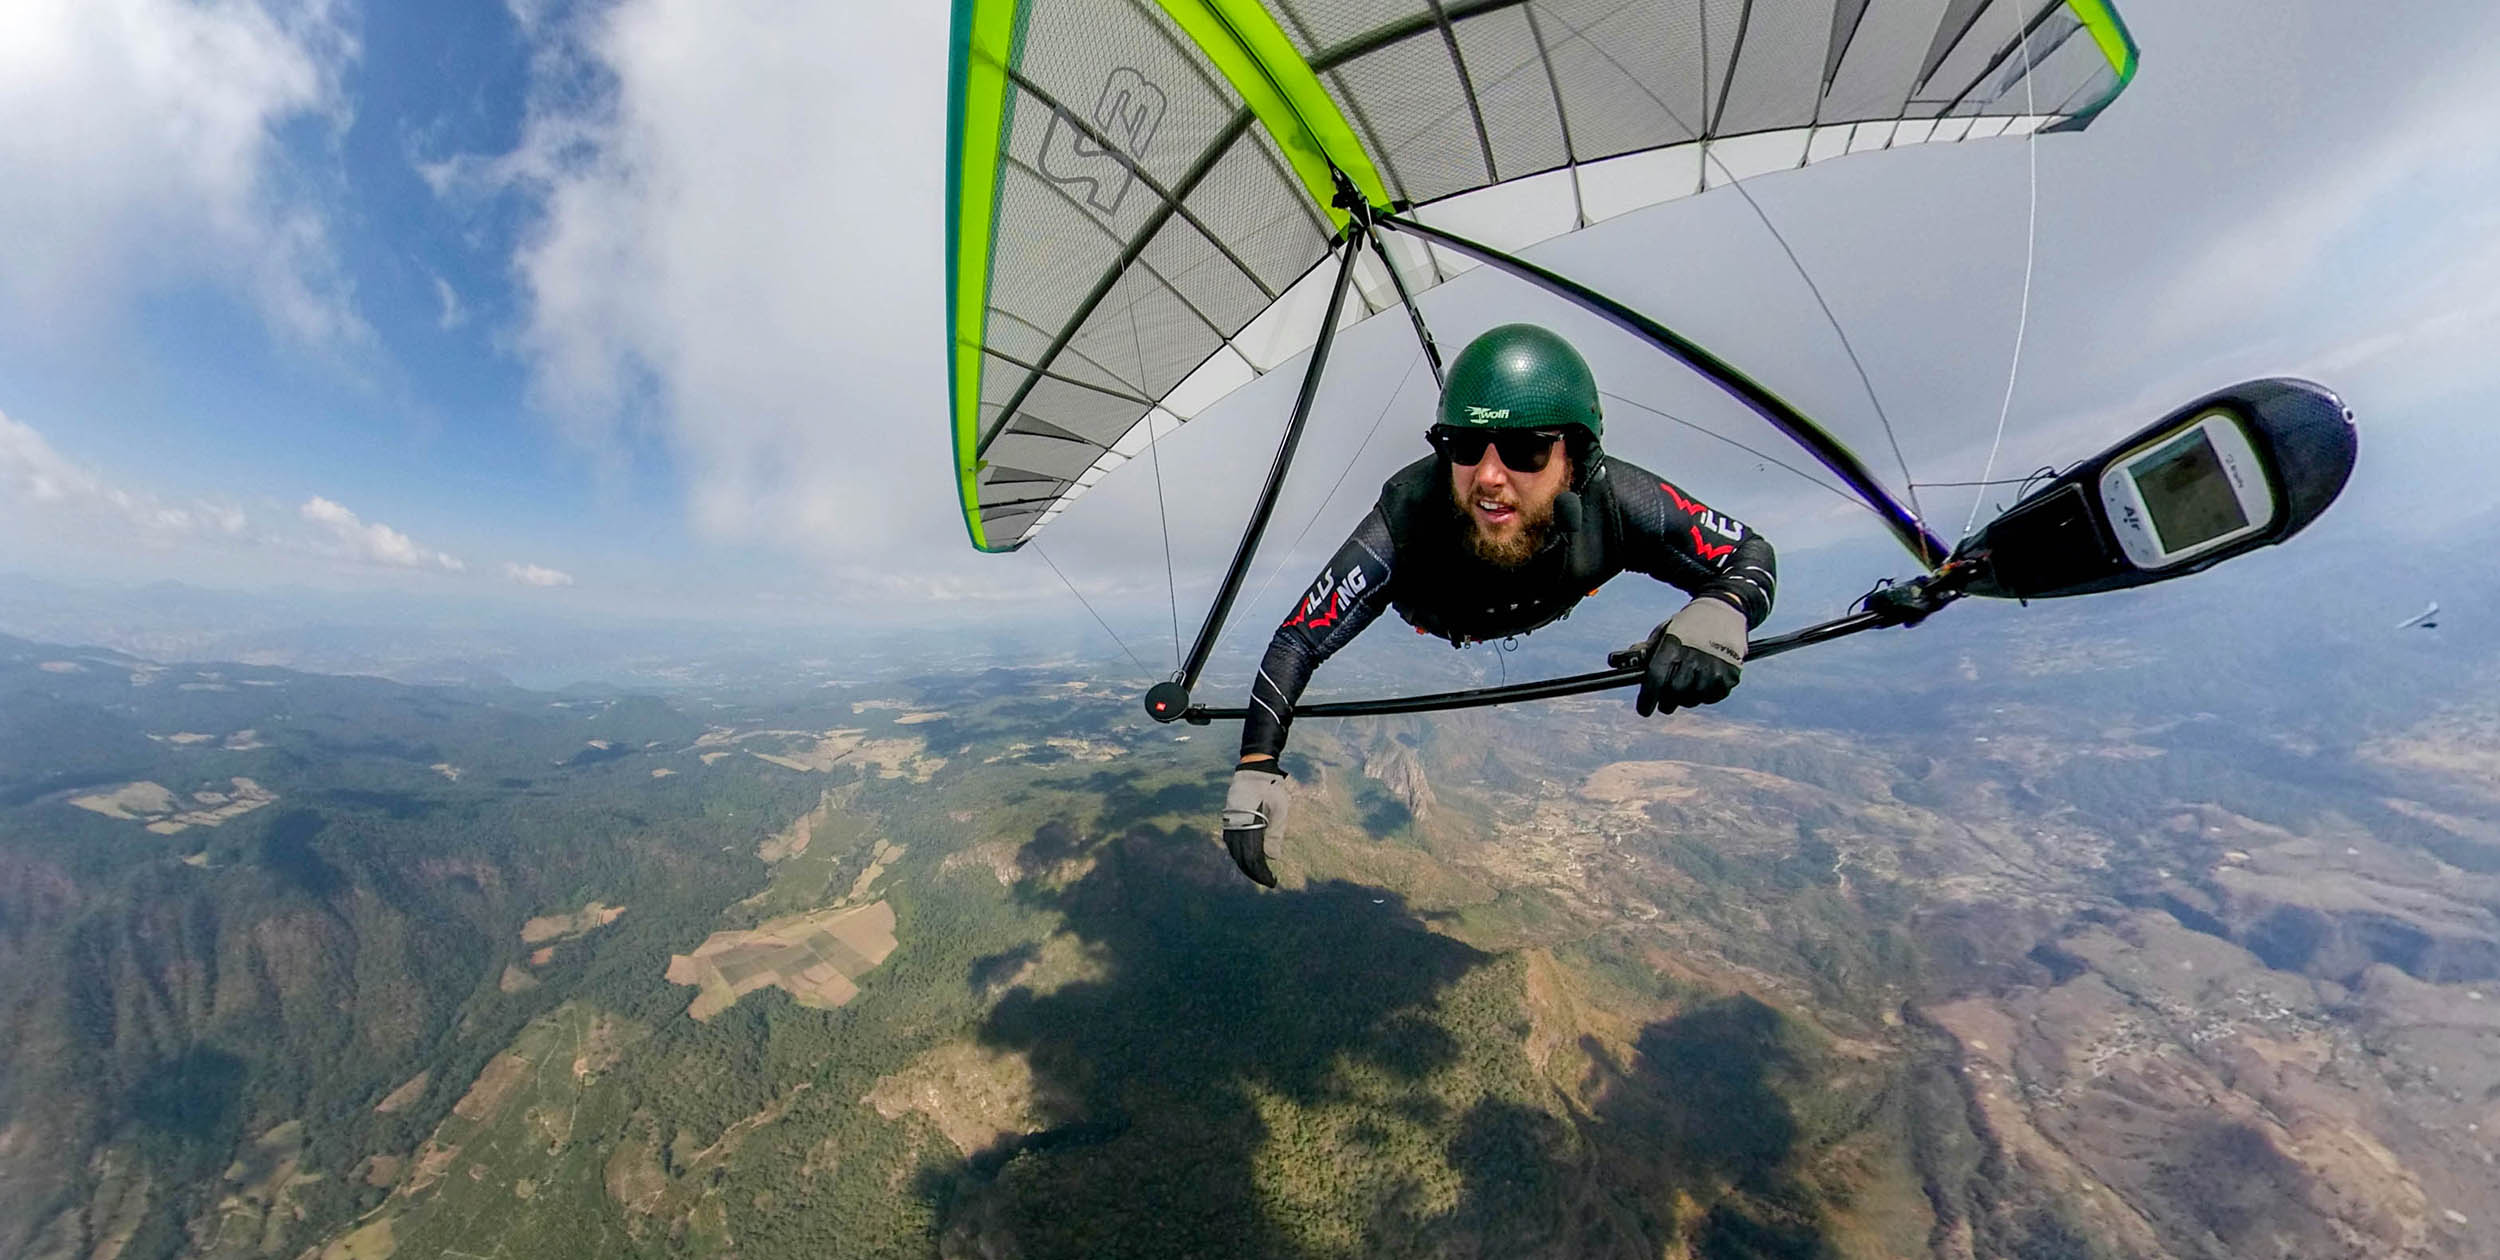 Paragliding and hang gliding in Valle de Bravo. Photo: Wolfie Siess